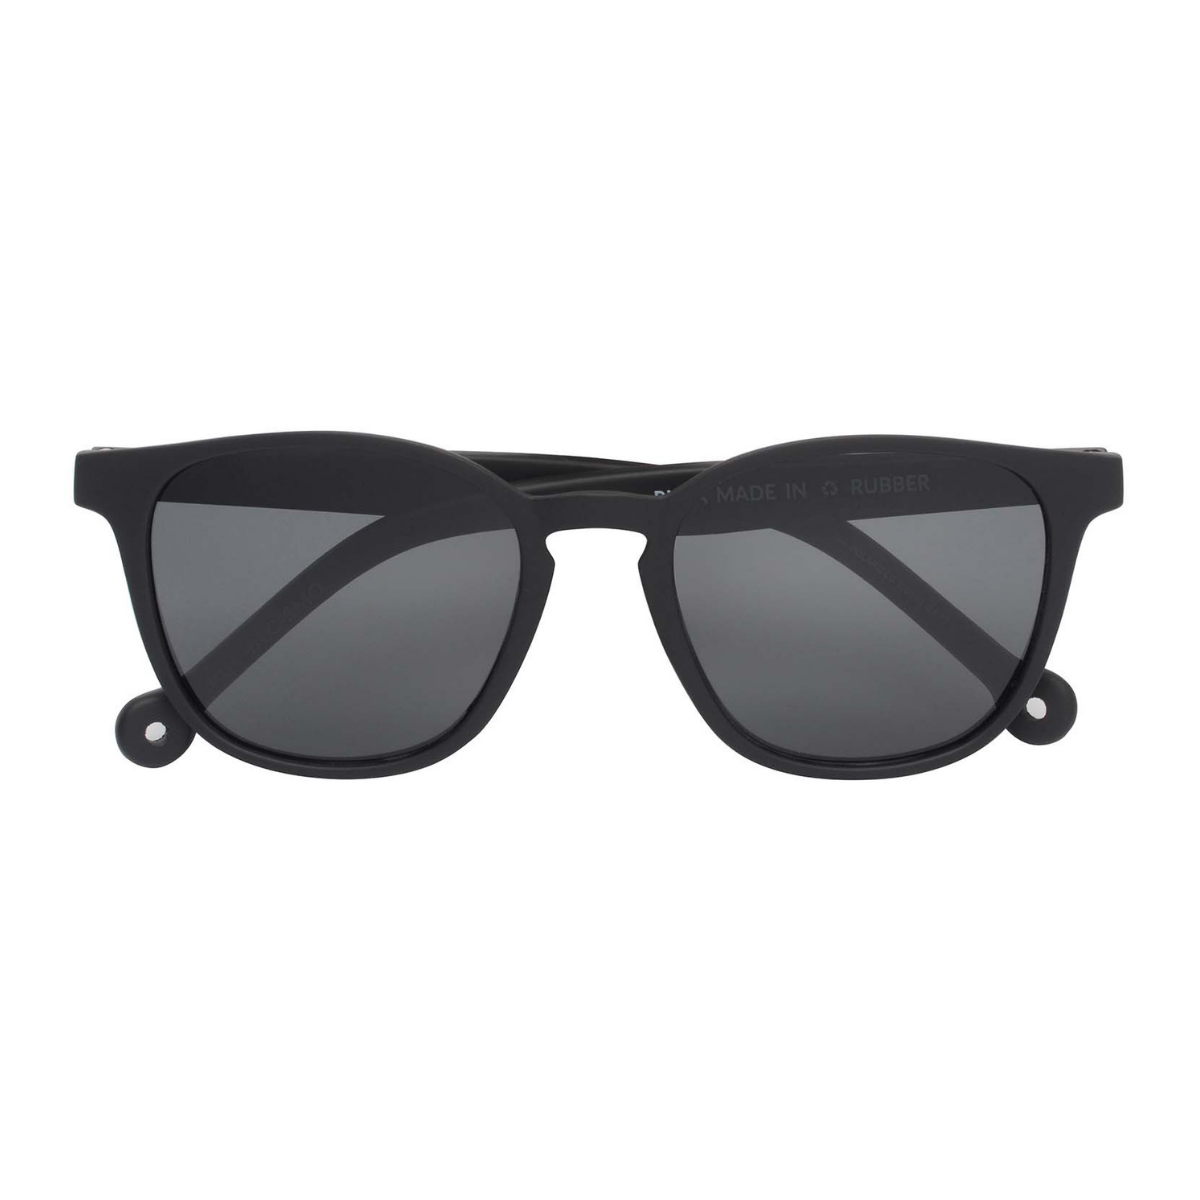 Parafina - Sonnenbrille Ruta Recycled Rubber Black - Nahmoo